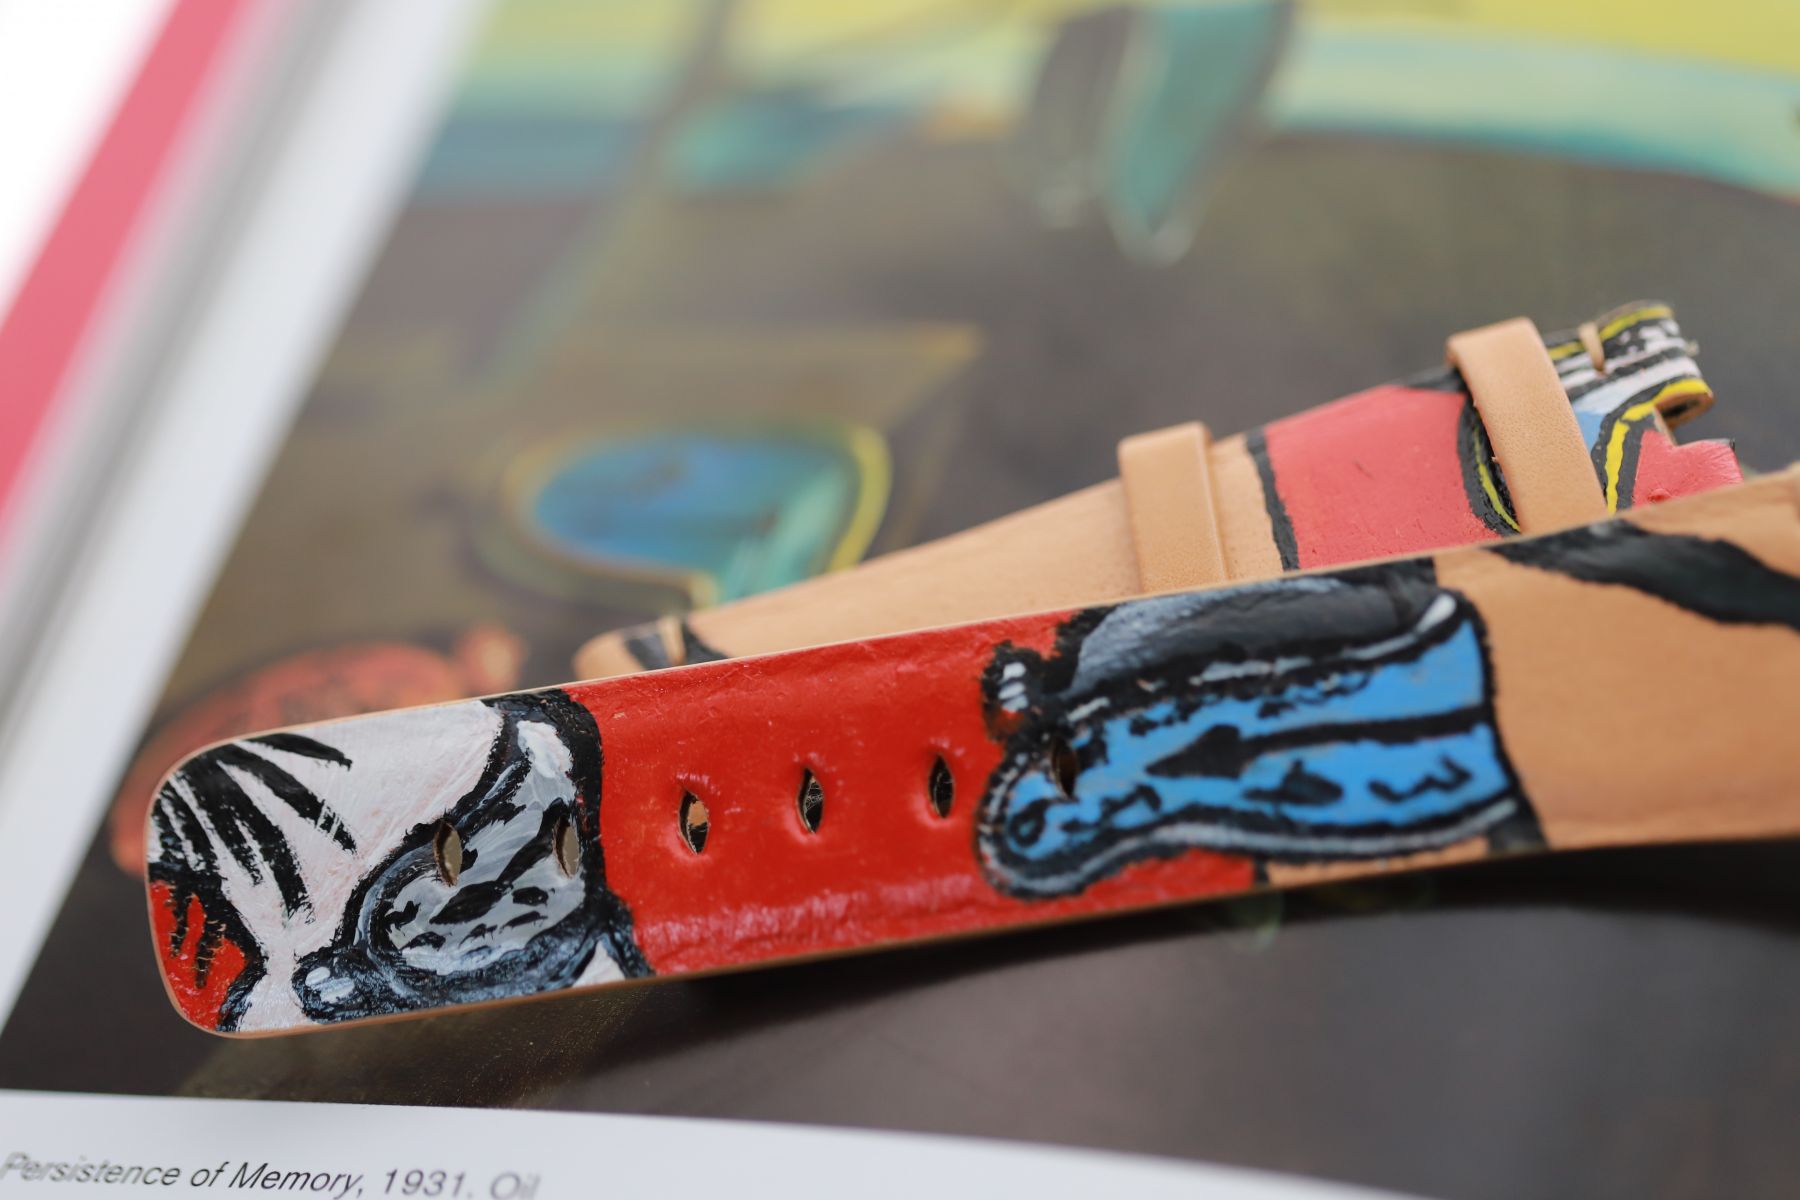 ART Affection: Hand-Painted Band for Apple Watch Inspired by Dali's The Persistence of Memory